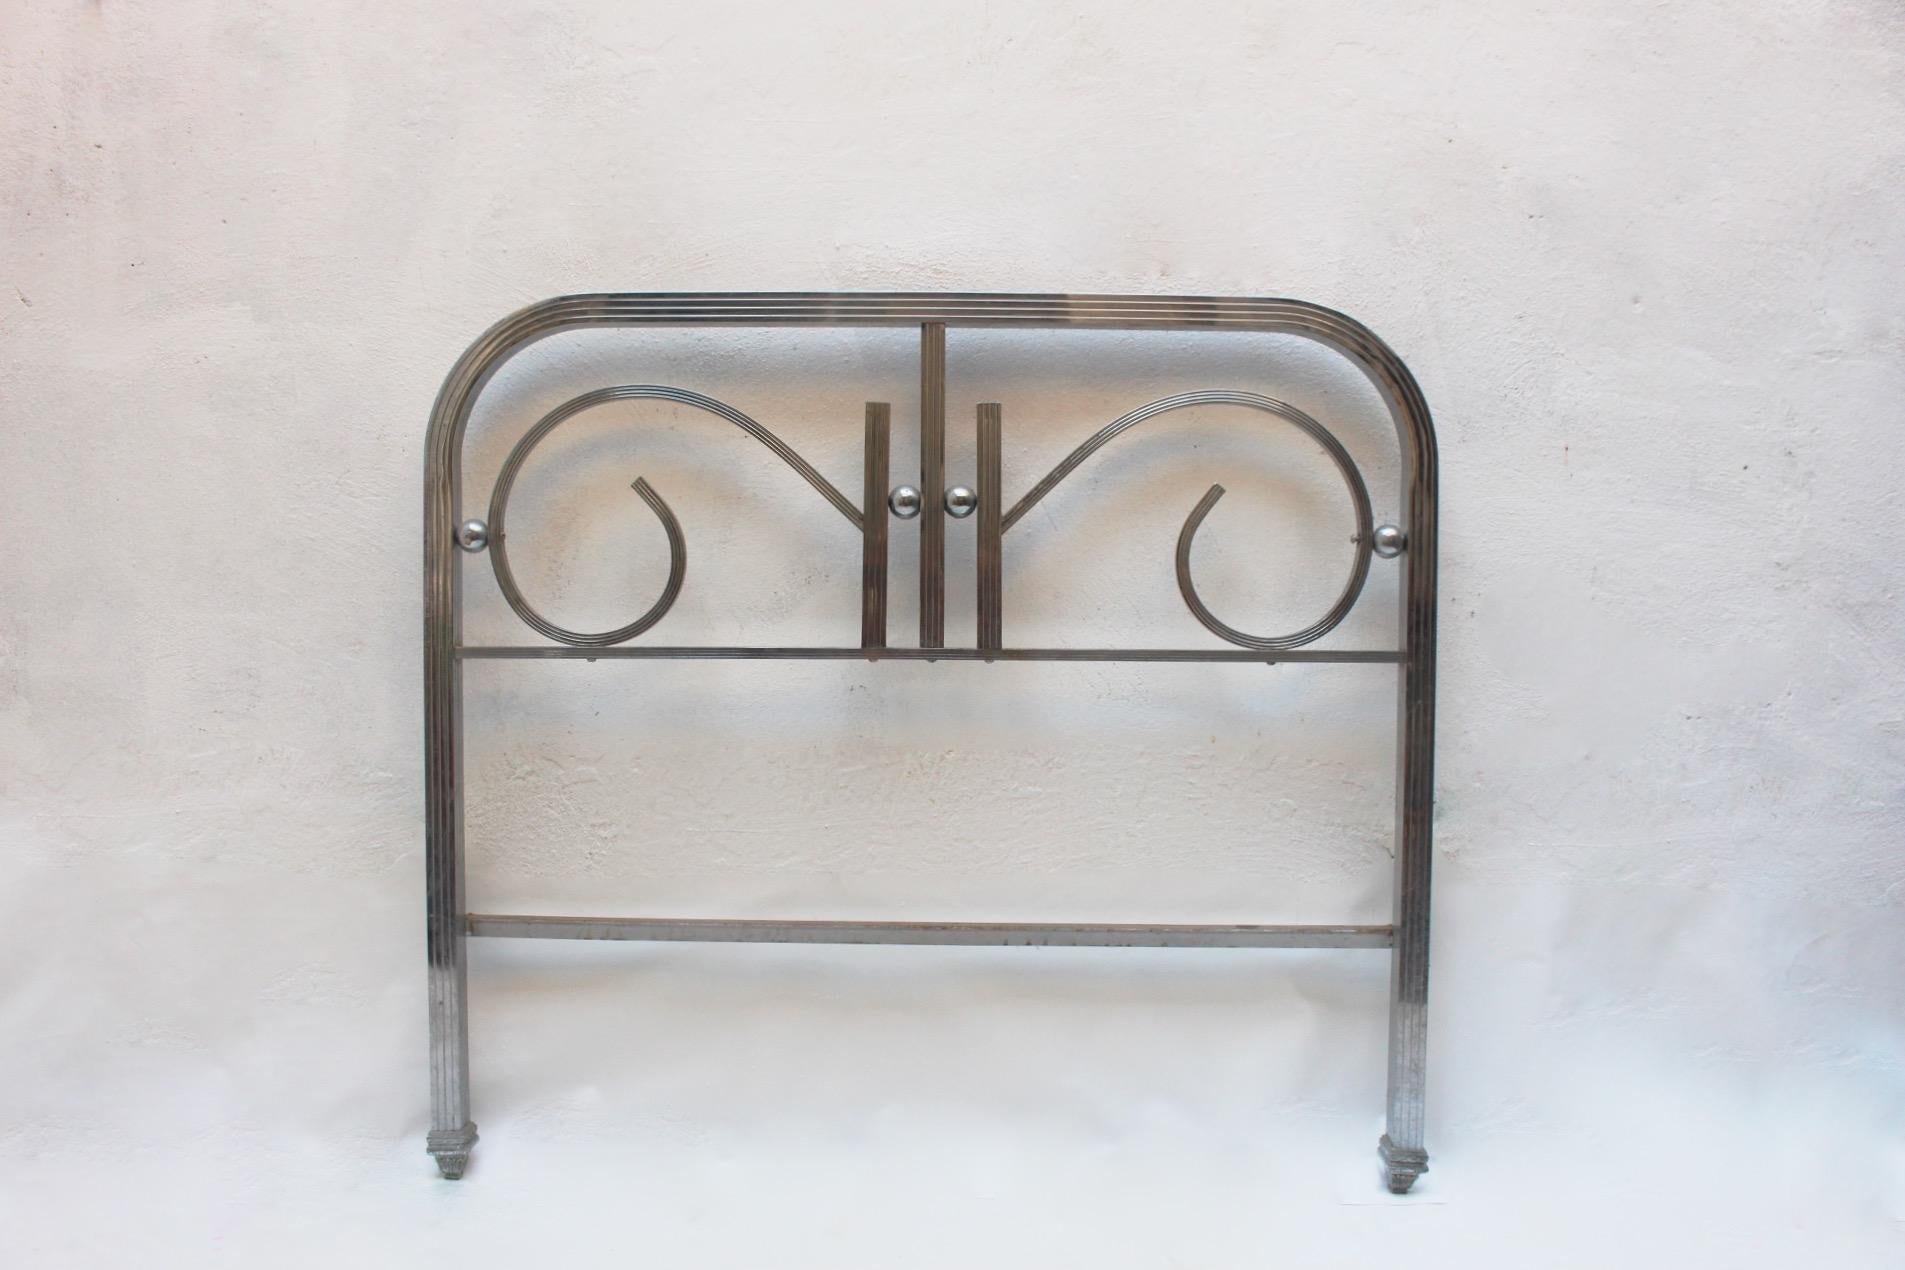 Spanish Art Deco Single Chrome Bed Headboard and Foot Part, 1930s For Sale